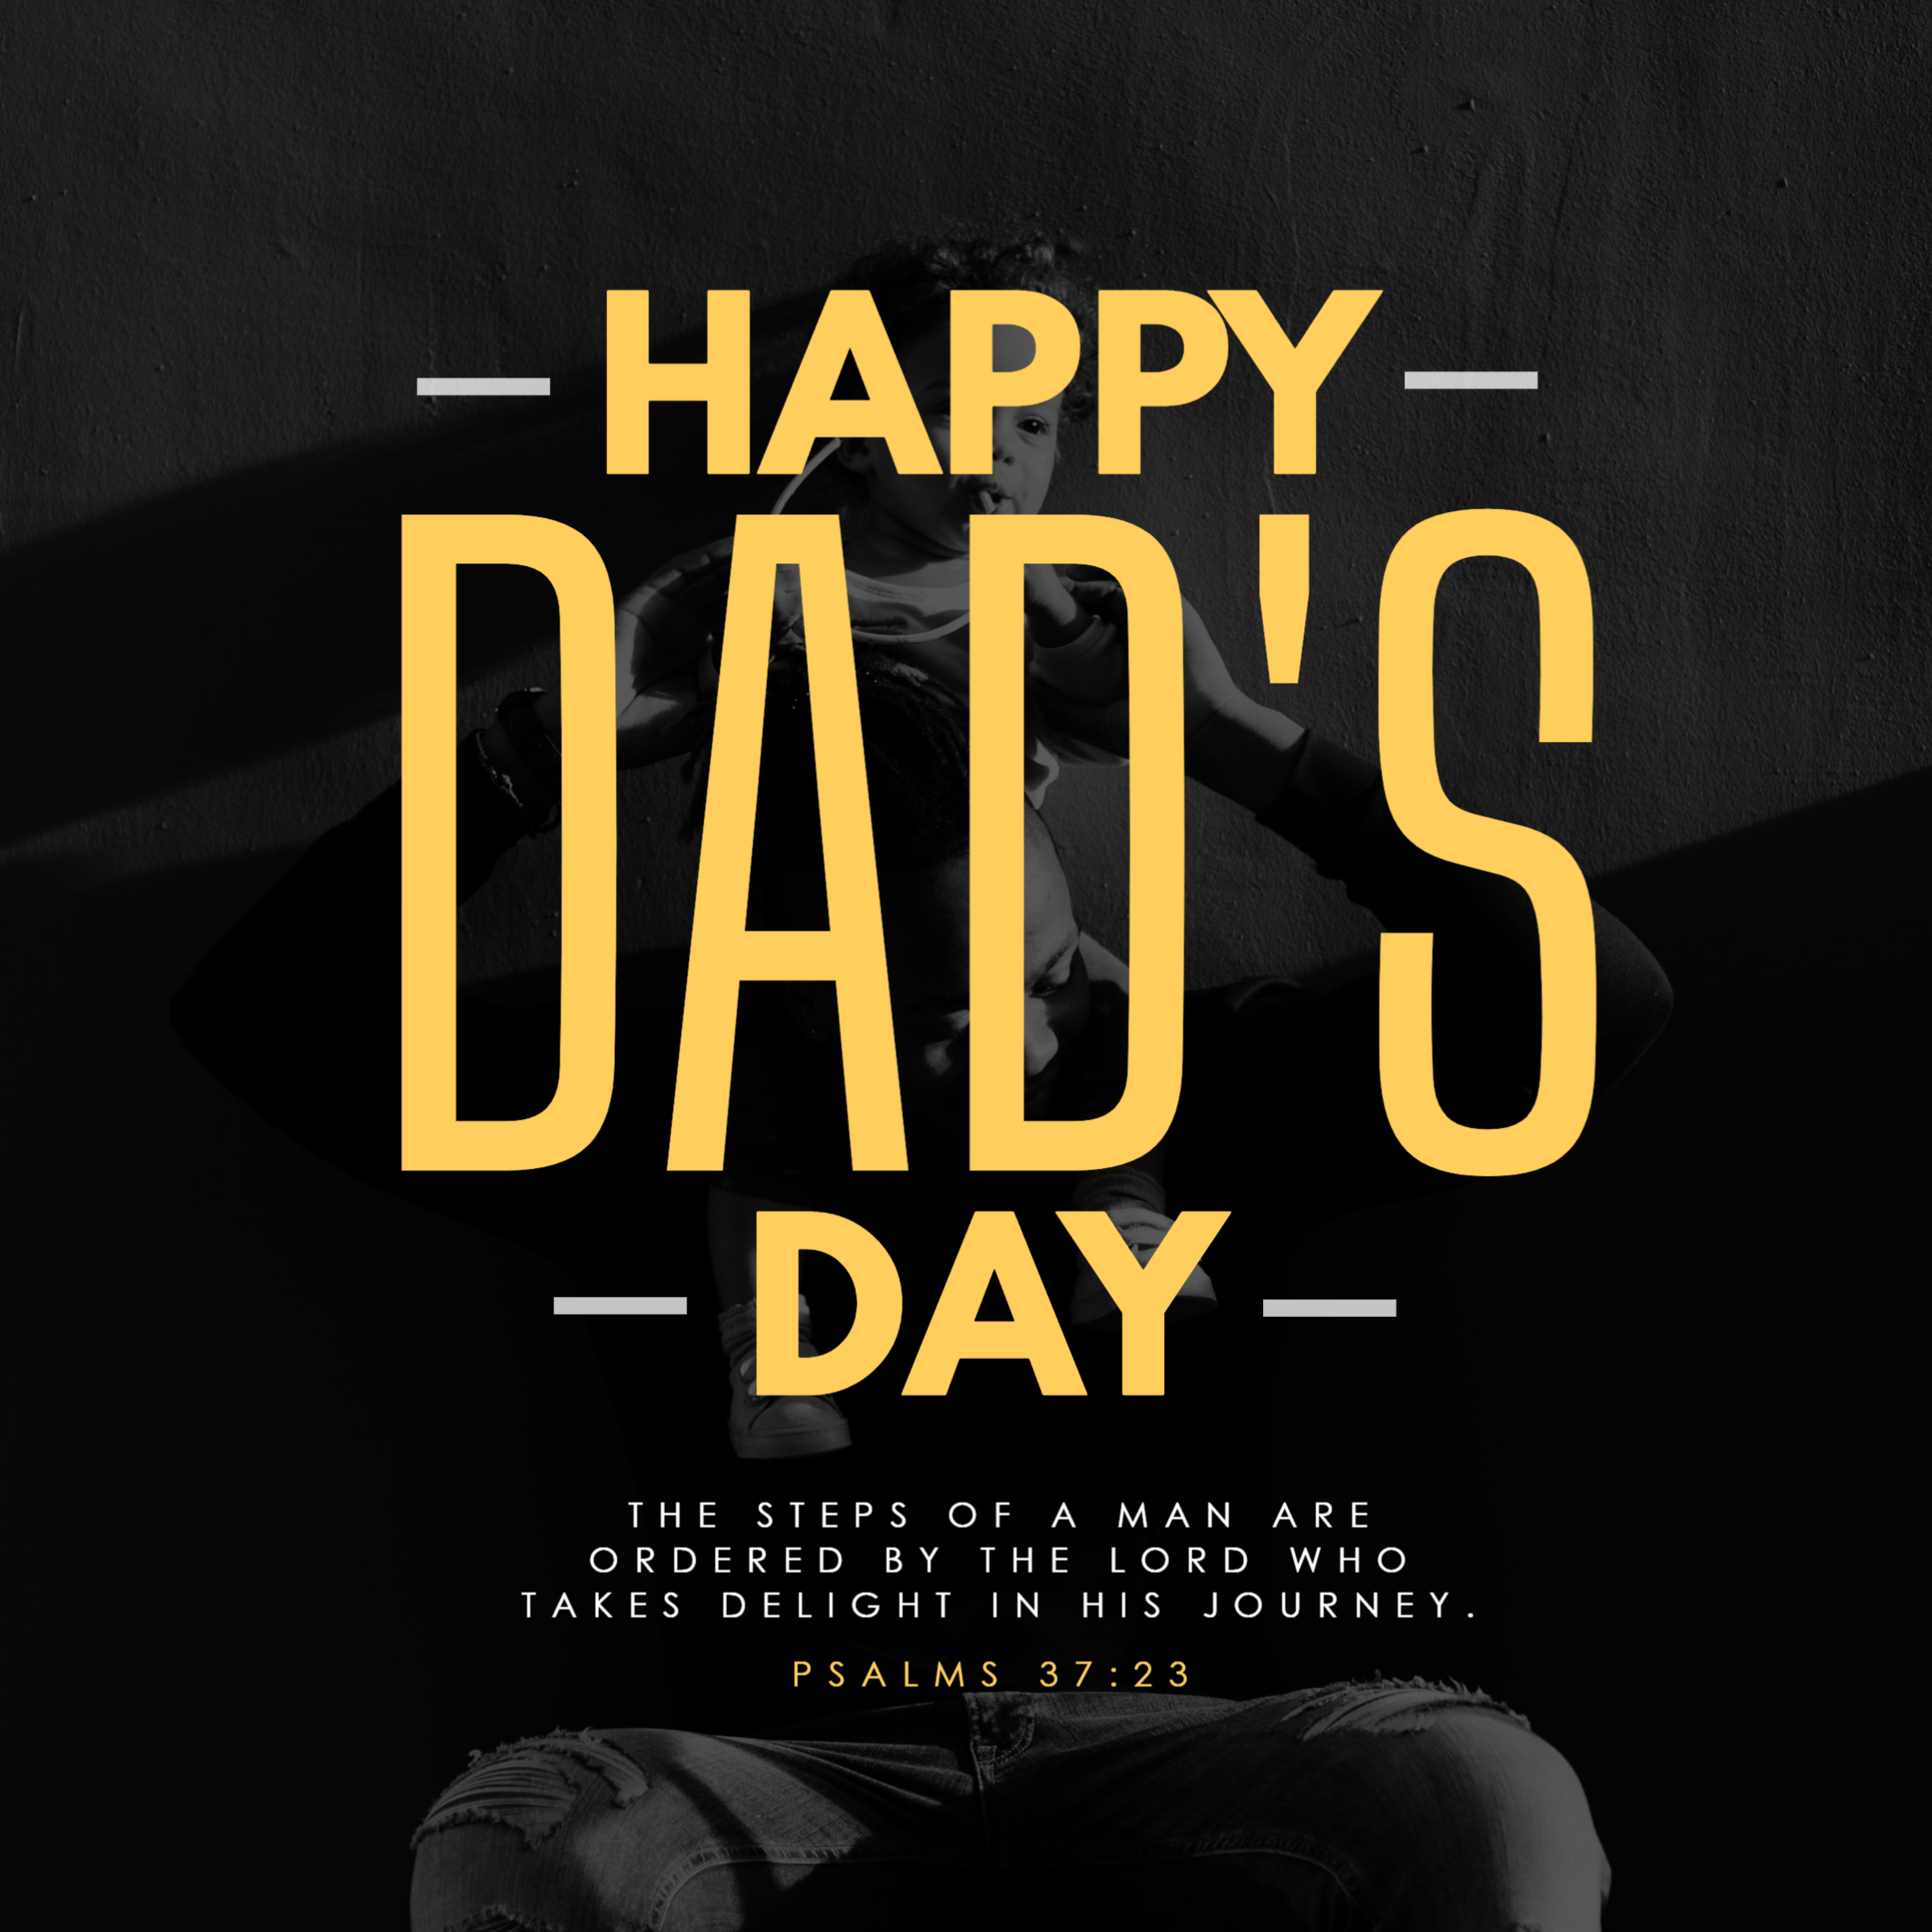 church father's day graphics